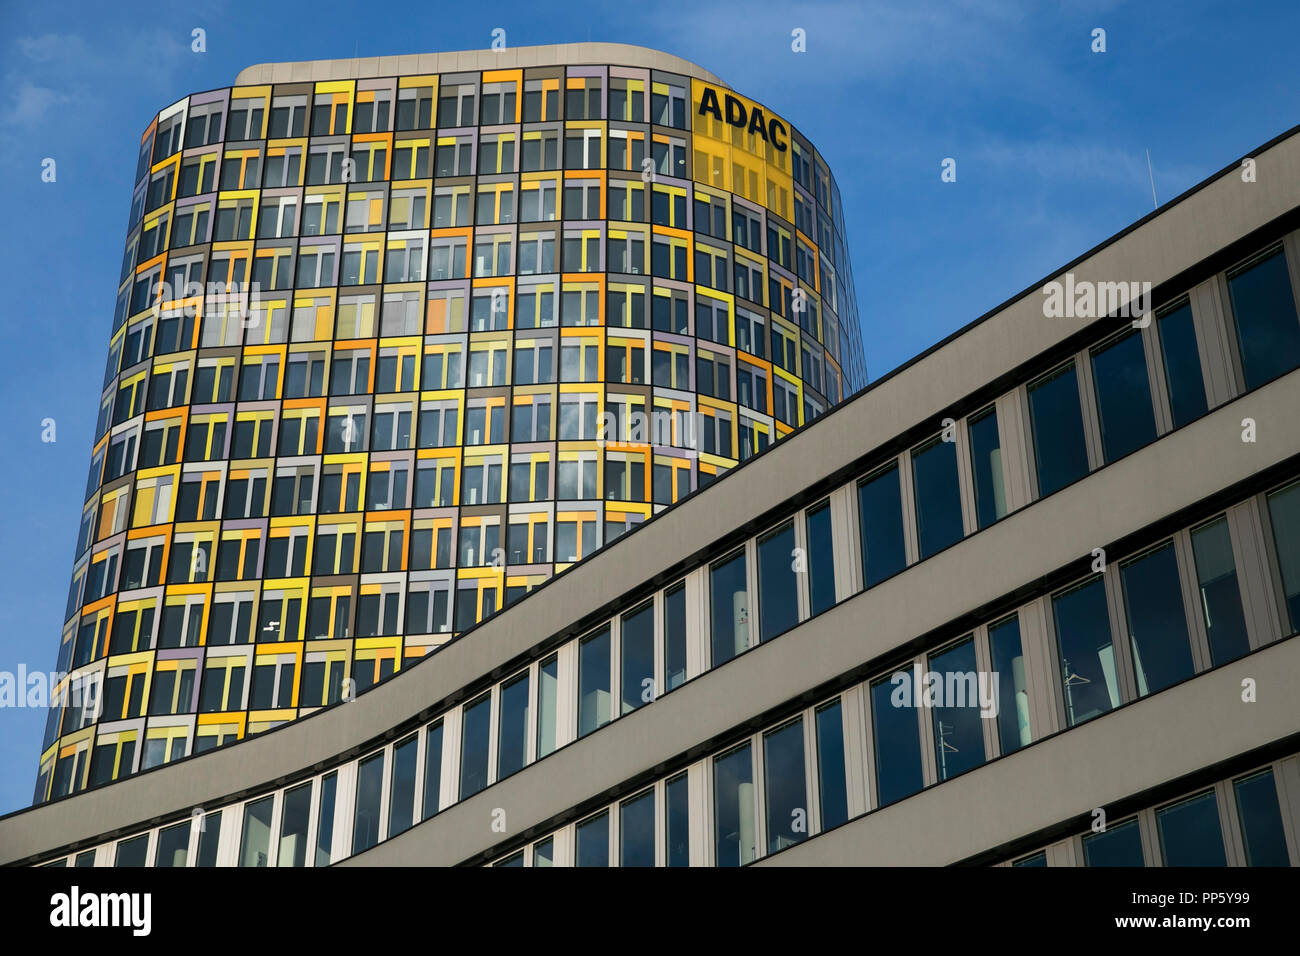 A logo sign outside of the headquarters of The ADAC (Allgemeiner Deutscher Automobil-Club) in Munich, Germany, on August 29, 2018. Stock Photo